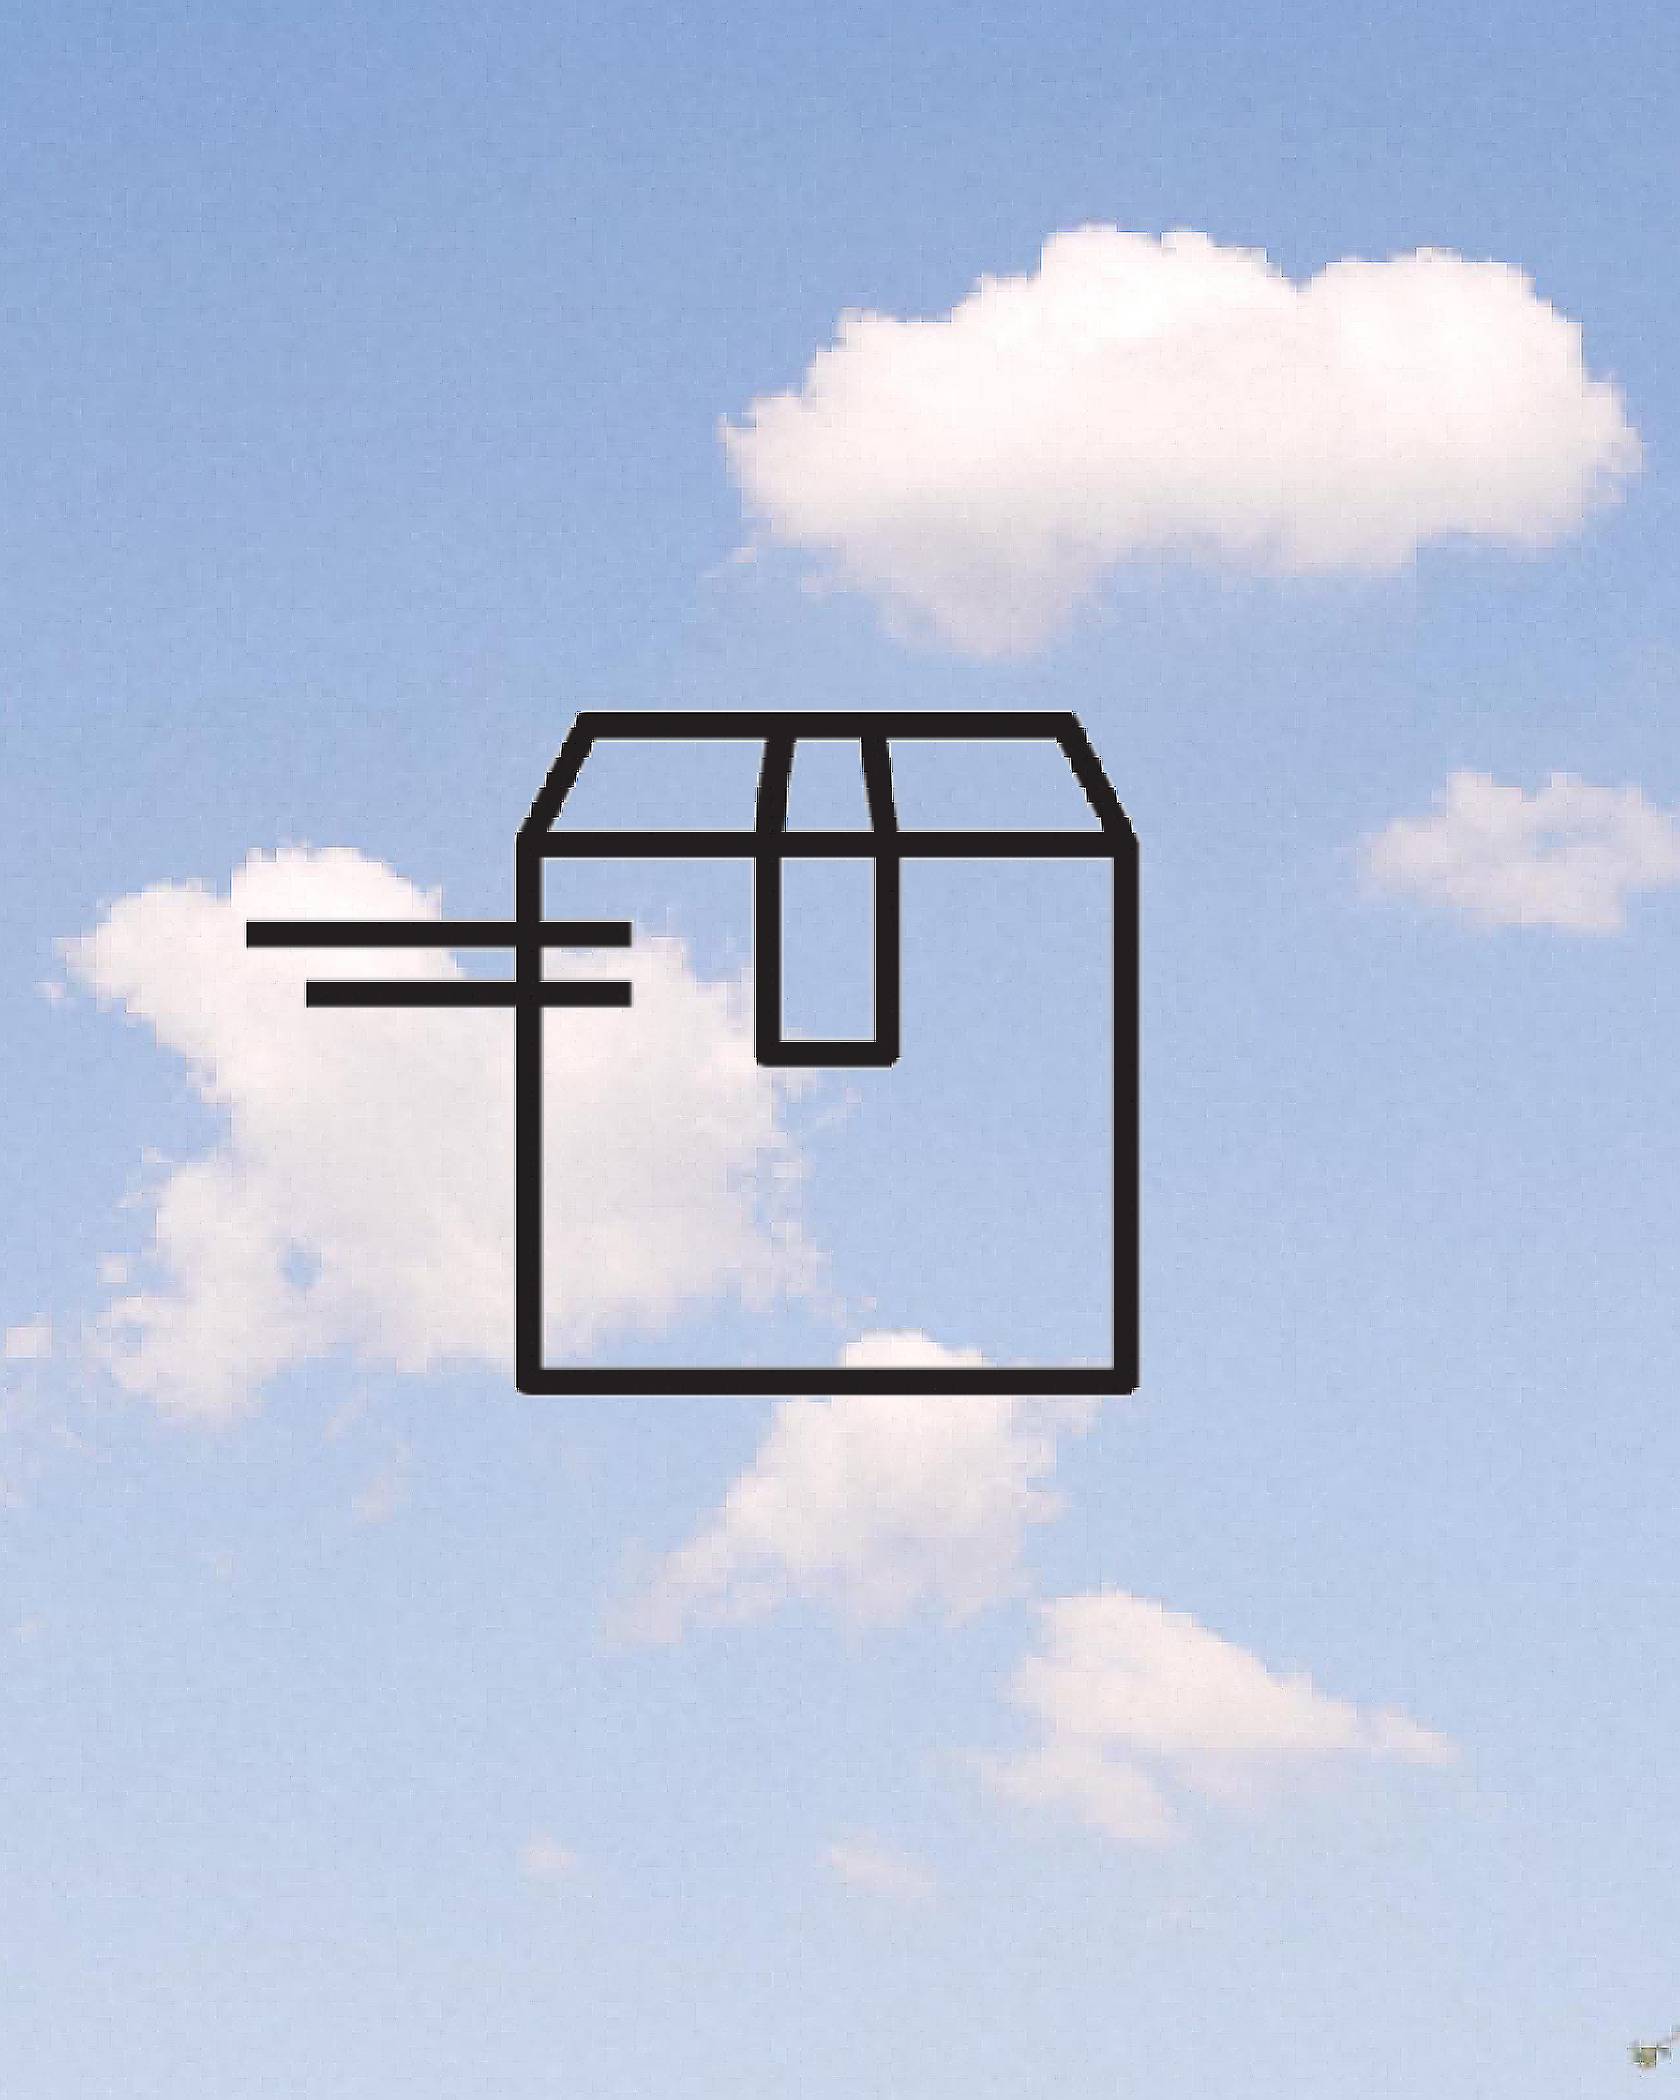 Image of a box in clouds.